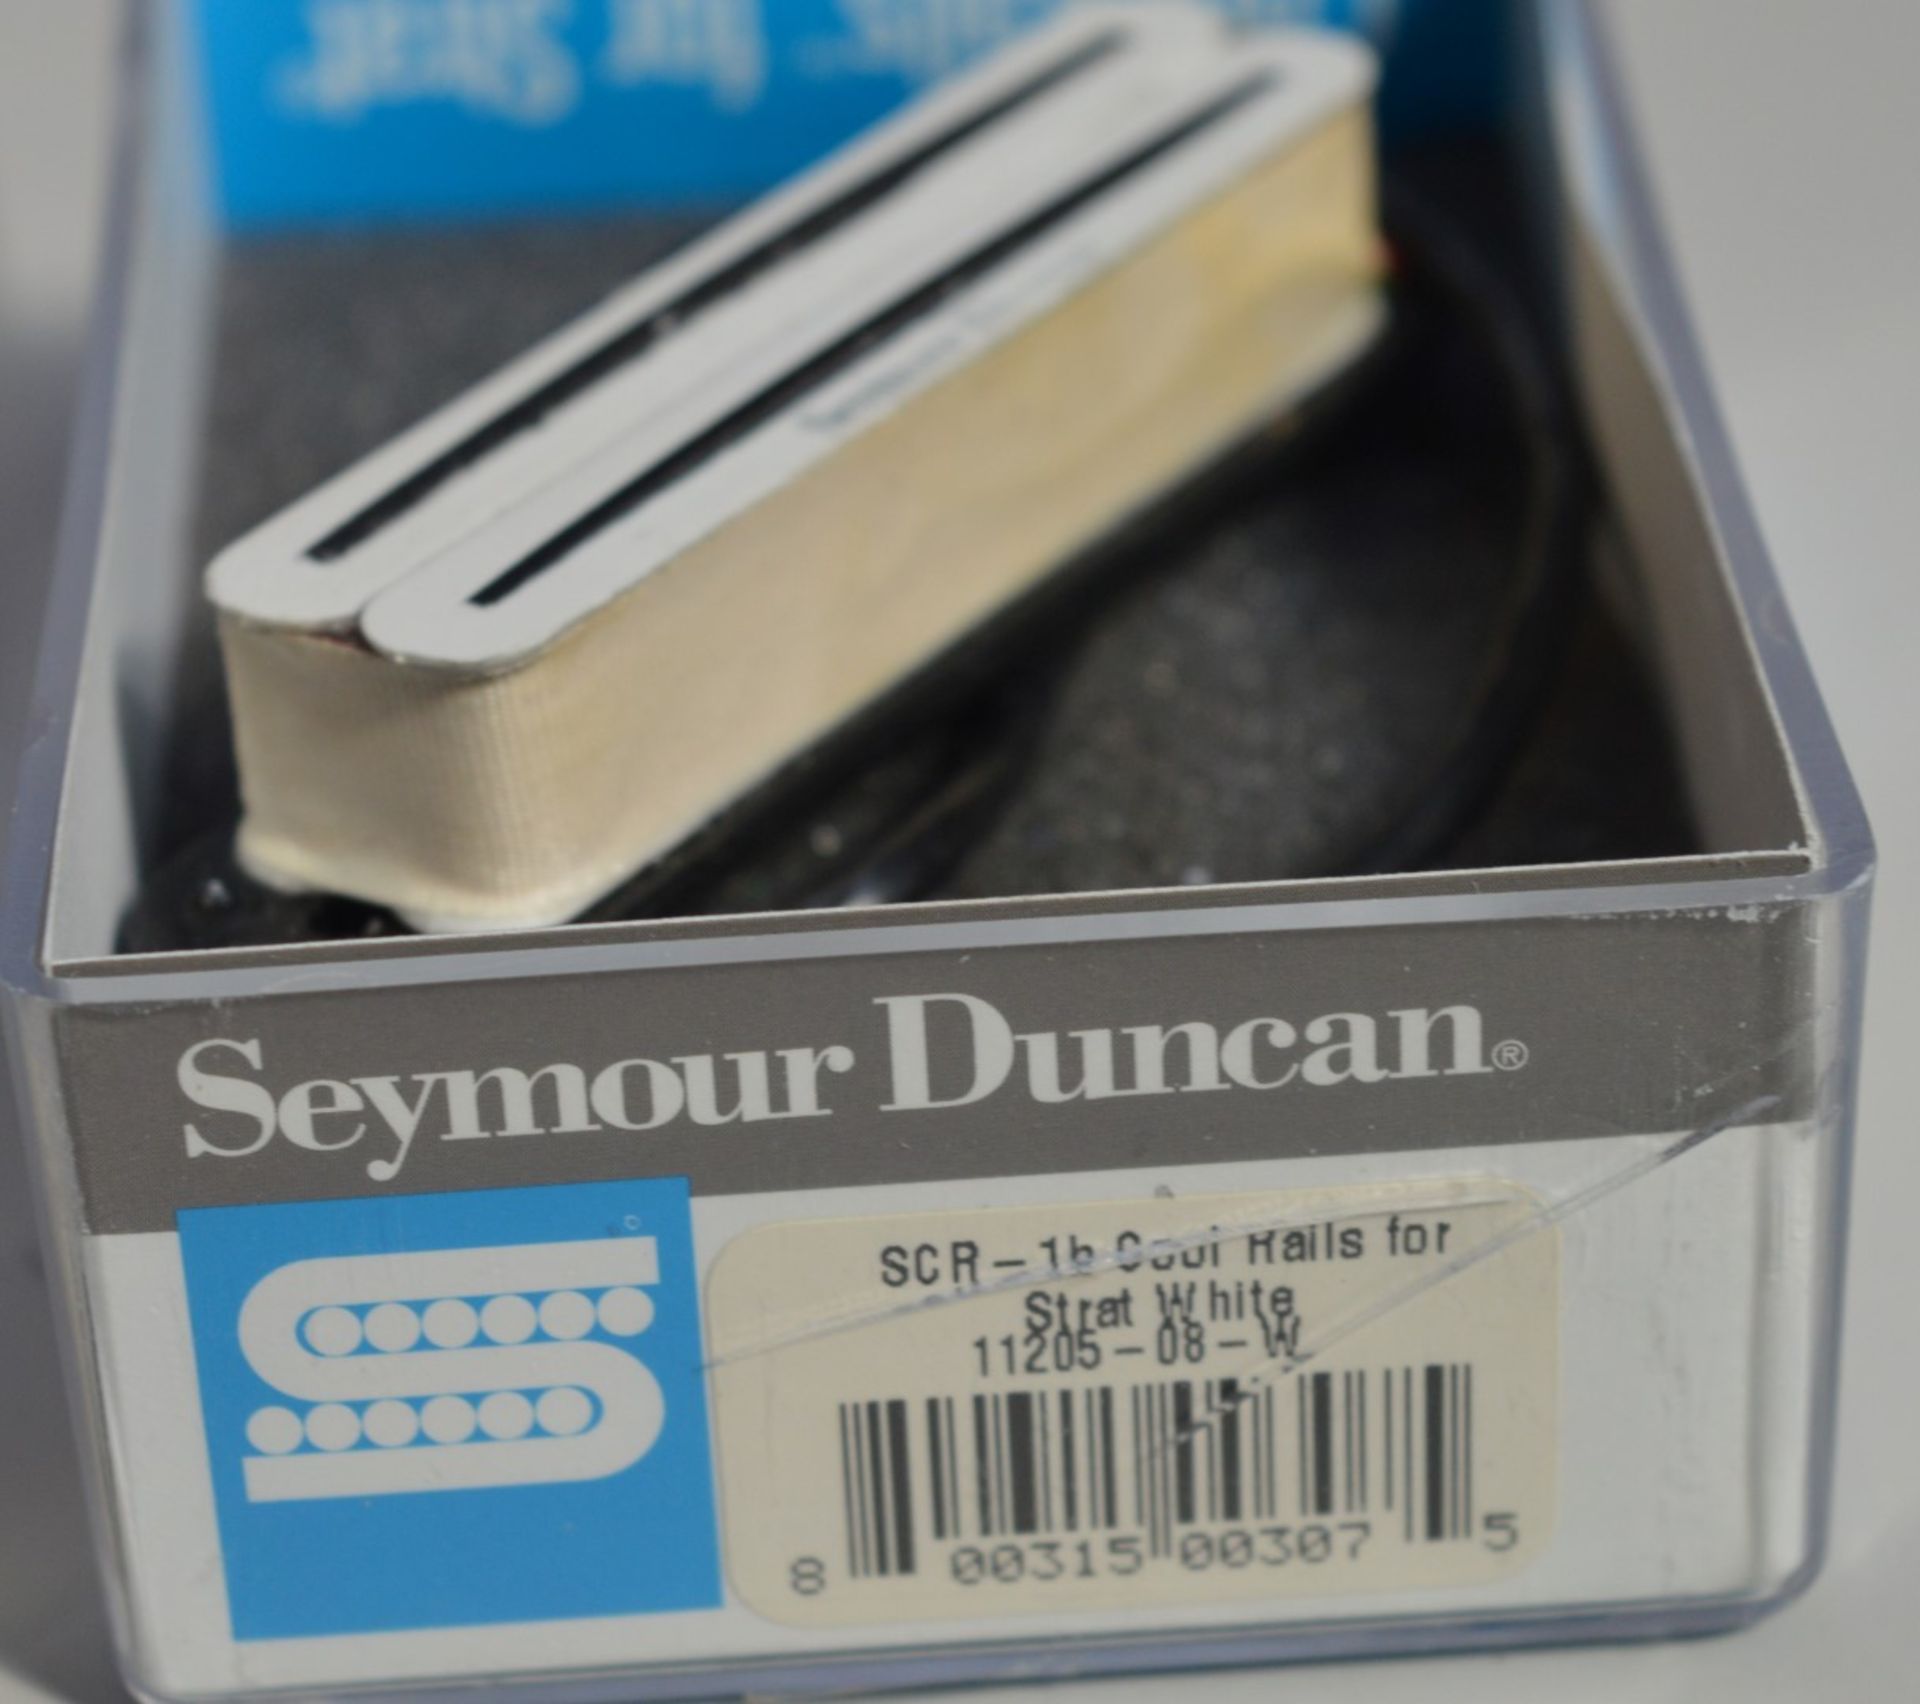 1 x Seymour Duncan Cool Rails Bridge Pickup - Suitable For Fender Strats - SCR-1B - With Original - Image 2 of 4